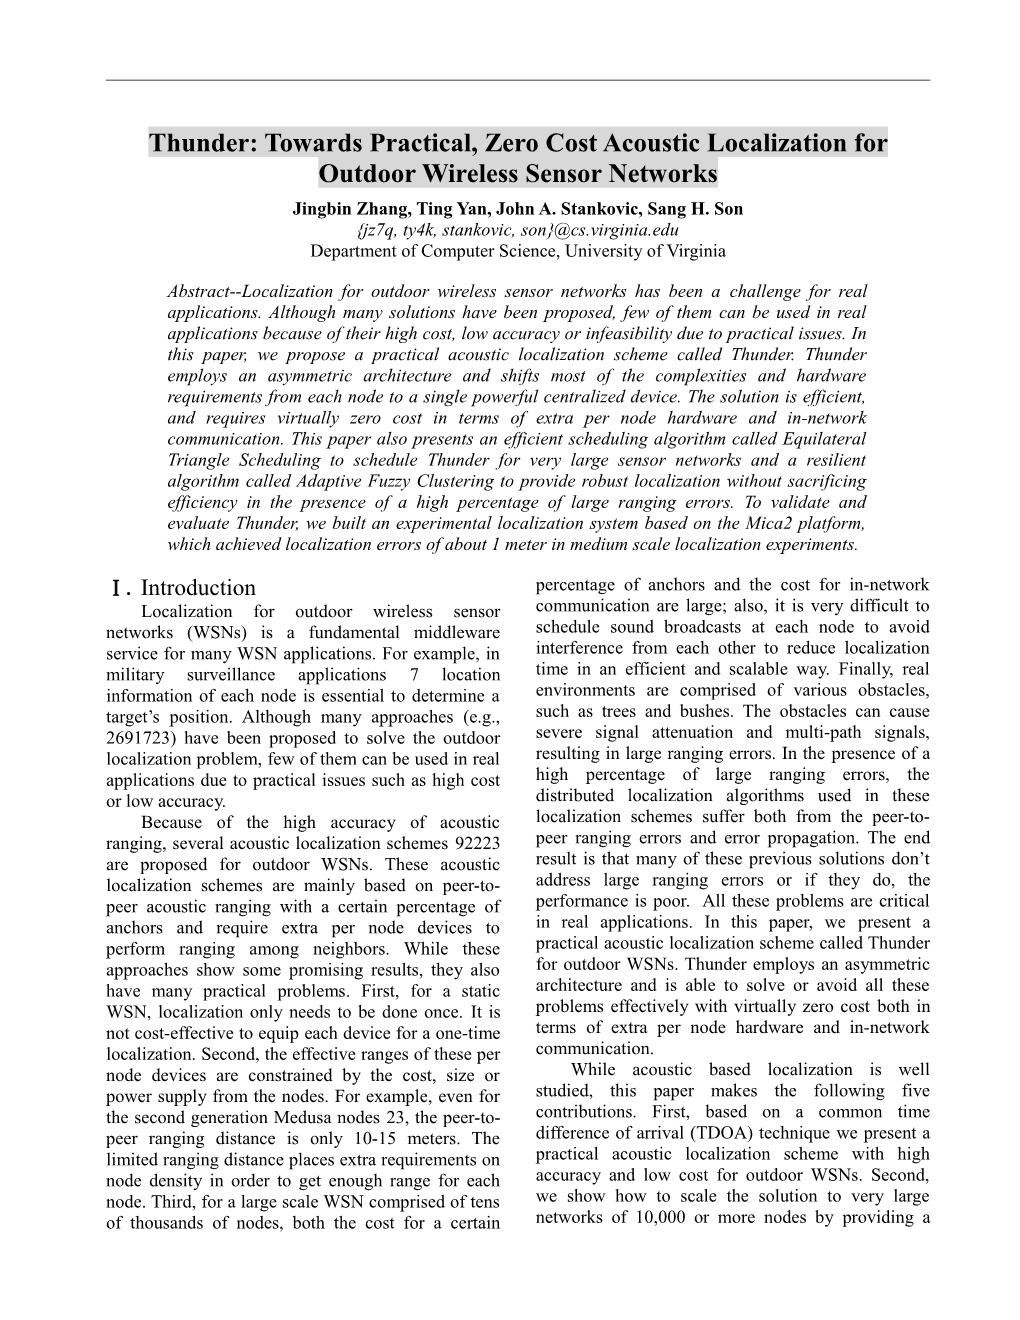 Thunder: a Practical Acoustic Localization Scheme for Outdoor Wireless Sensor Networks